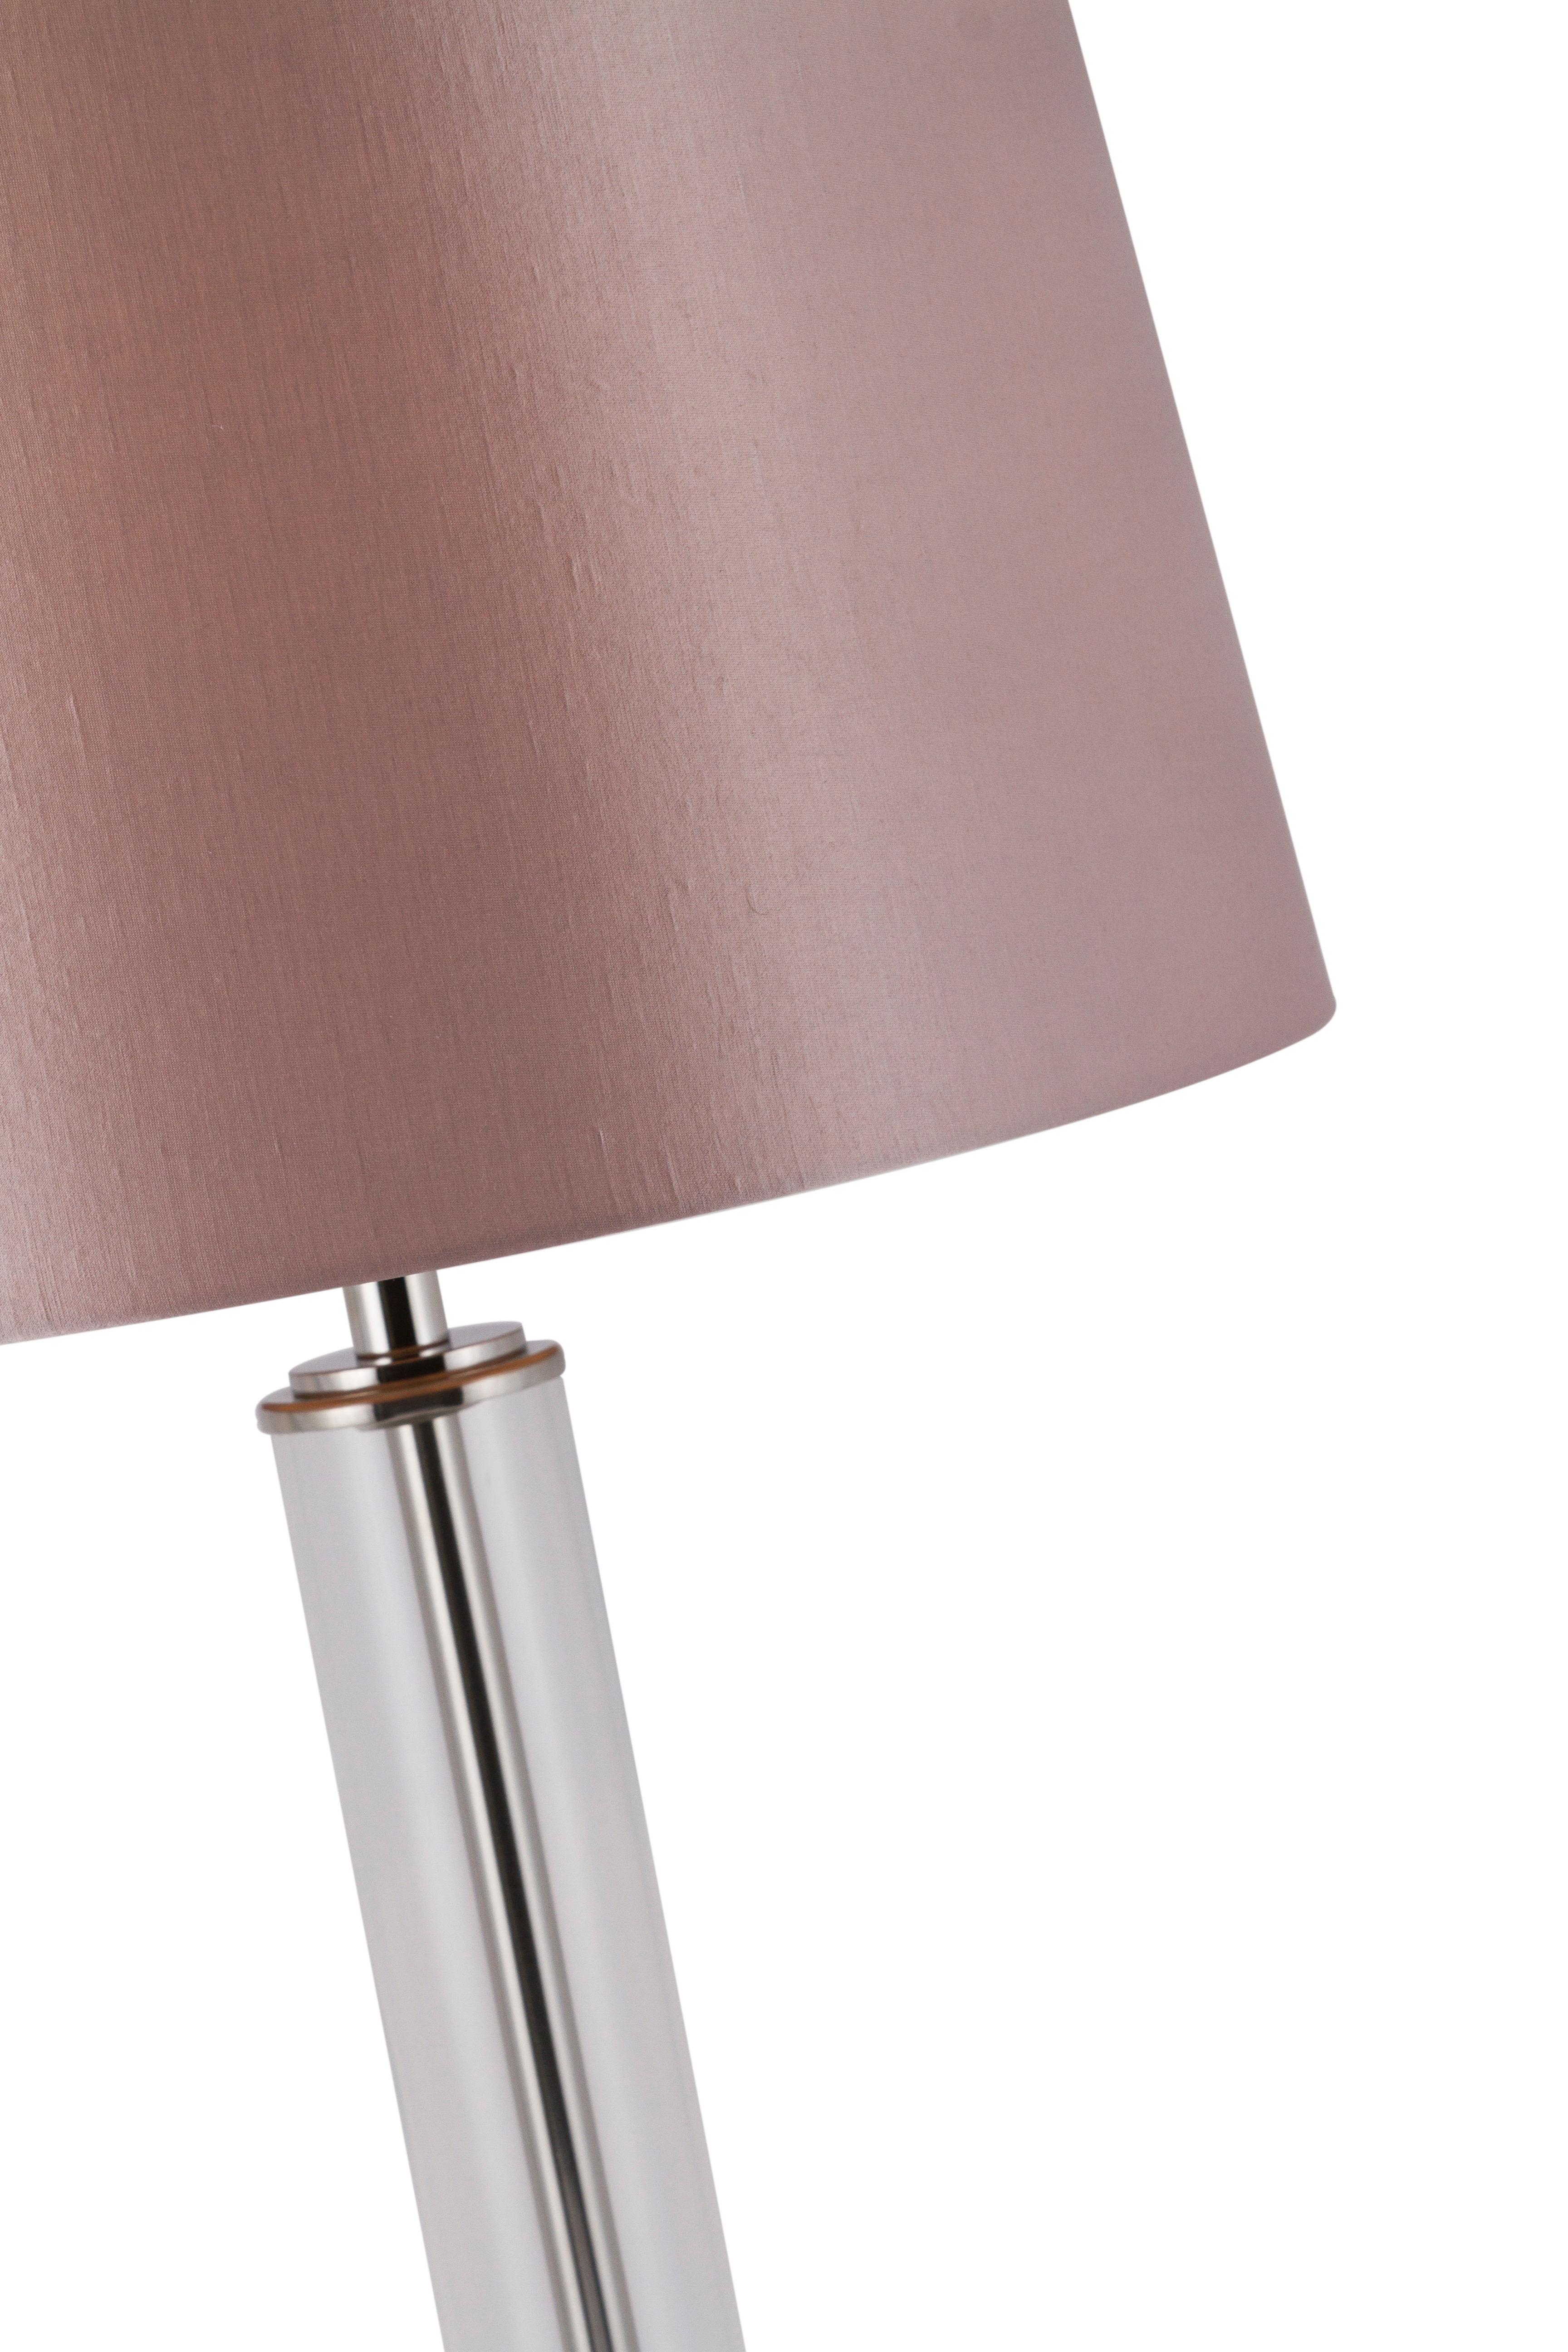 Portuguese Set of 2 Modern Dumont Table Lamps, Pink Lampshade, Handmade in Portugal For Sale